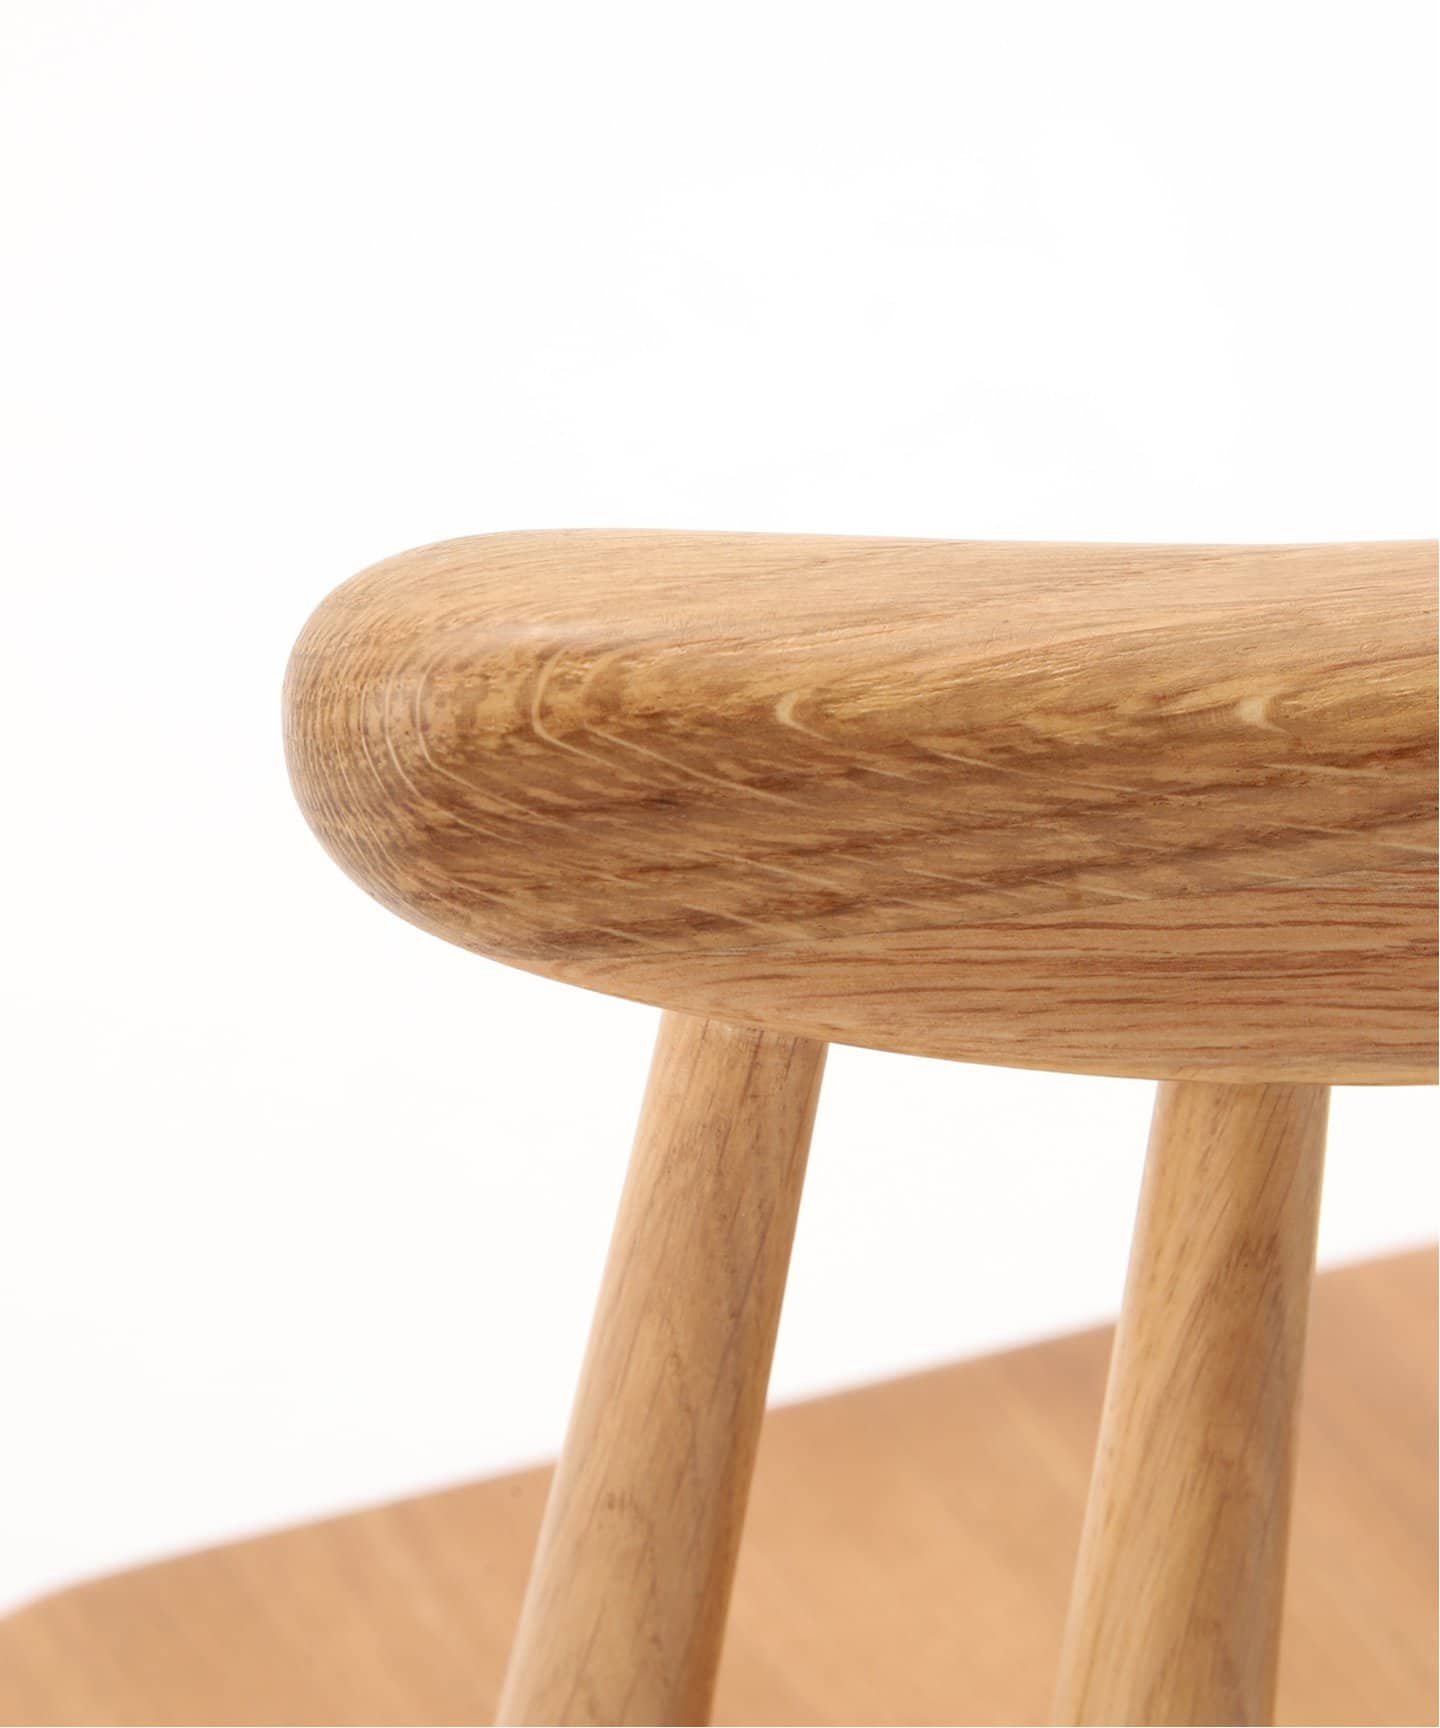 ADEL Tiny Chair_Type 2 アデル キッズ チェア　家具